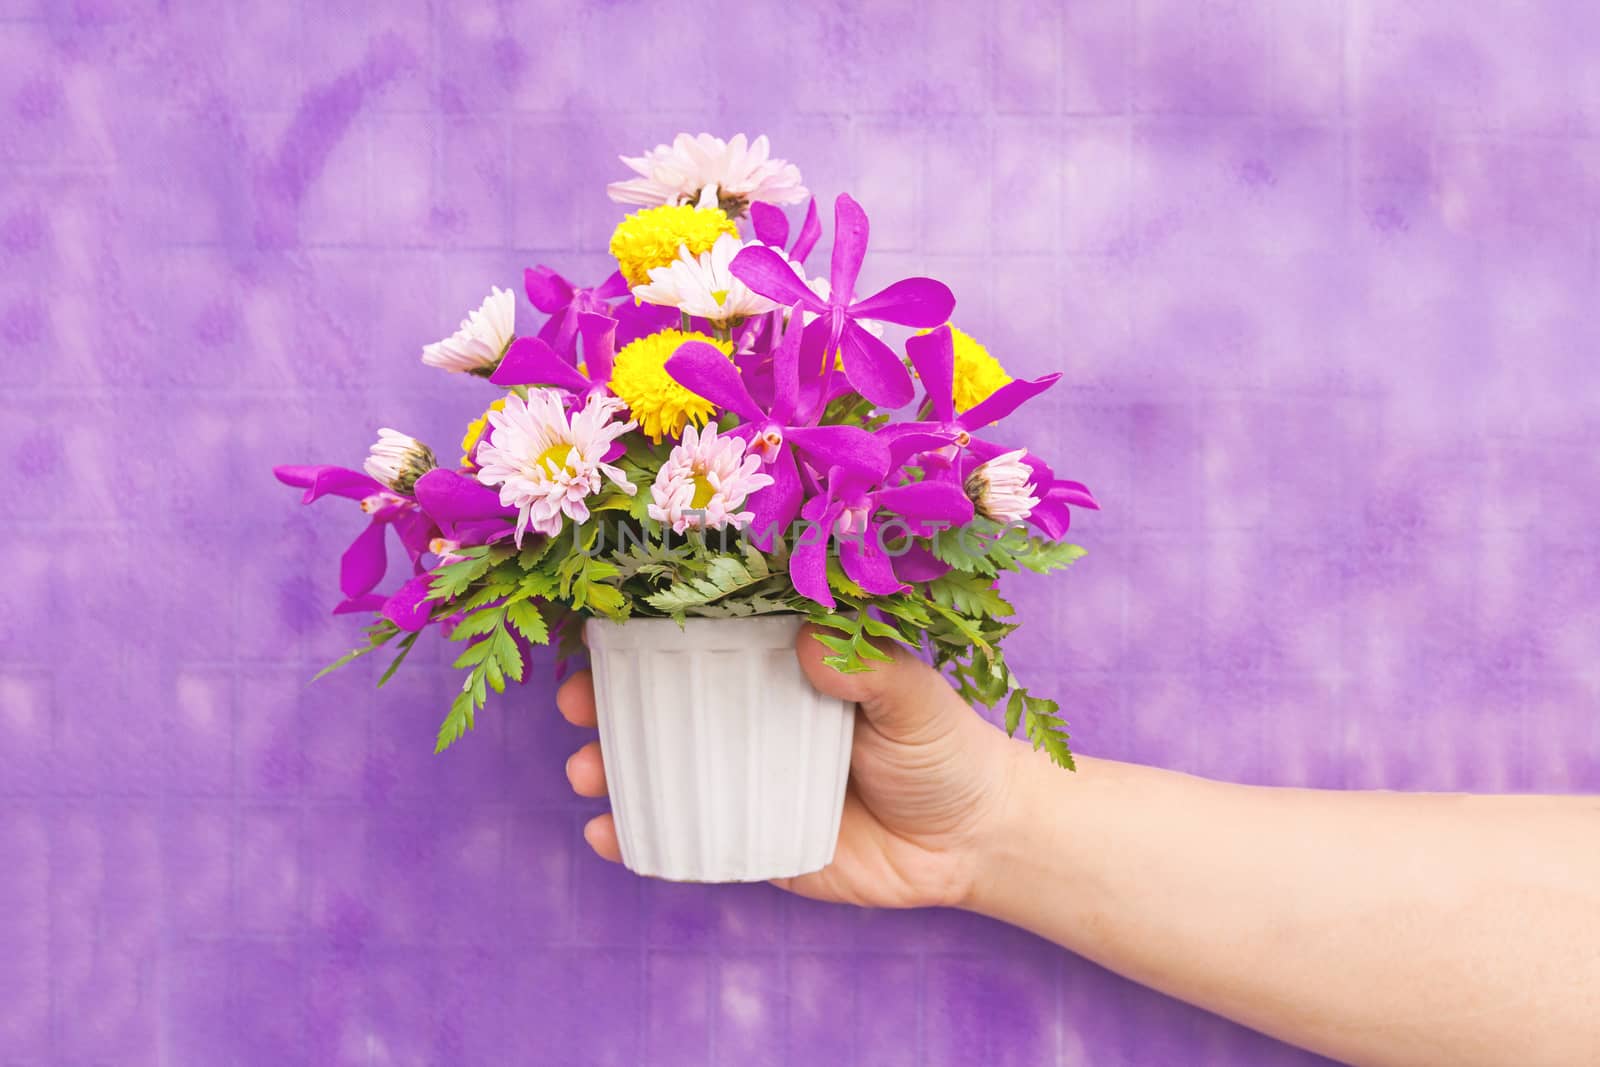 Hand holding bouquet of chrysanthemum and orchid flowers isolated on violet background.